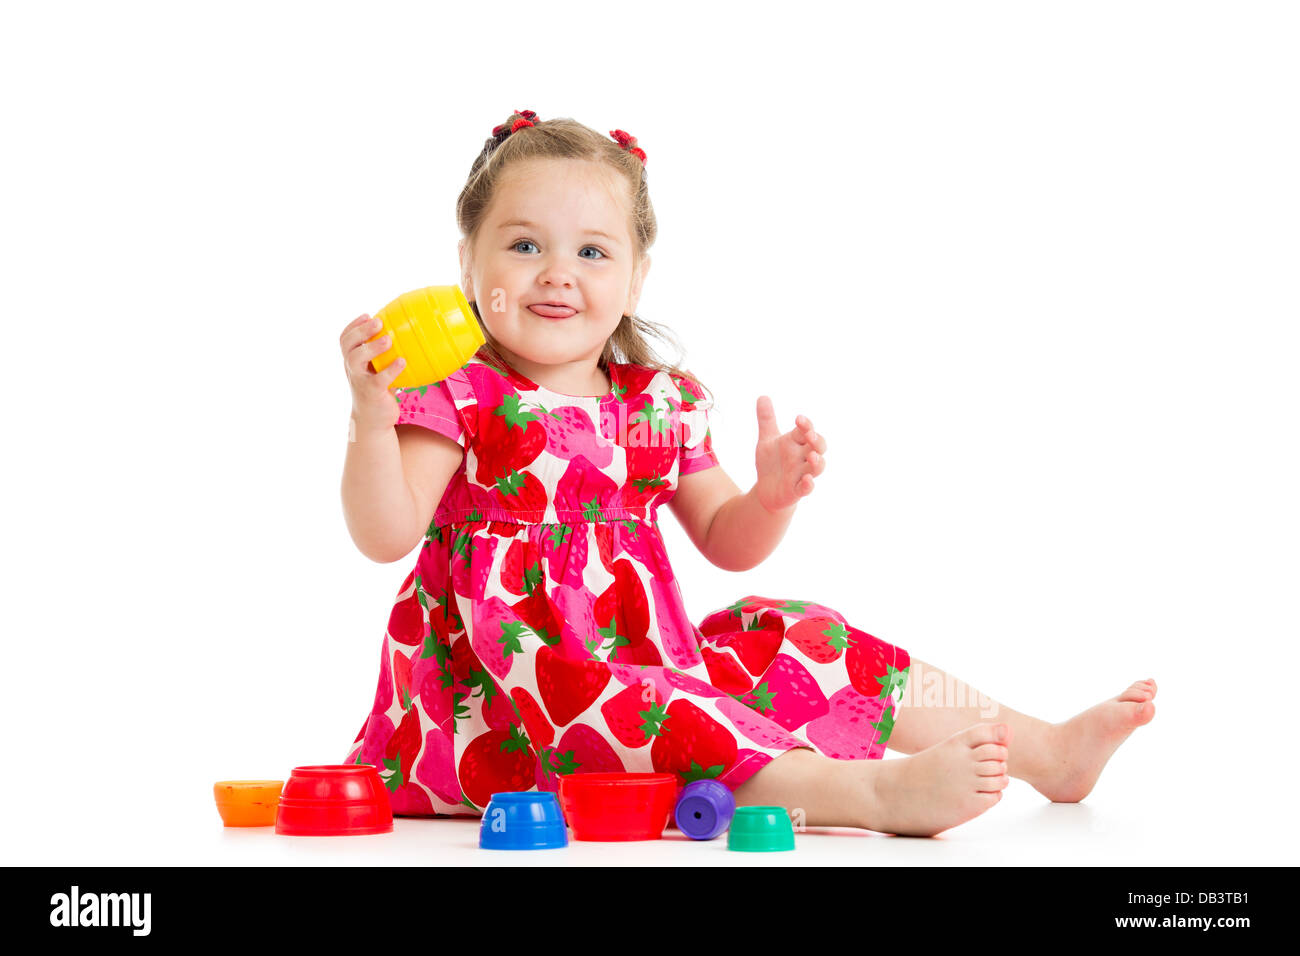 kid girl playing with cup toys Stock Photo